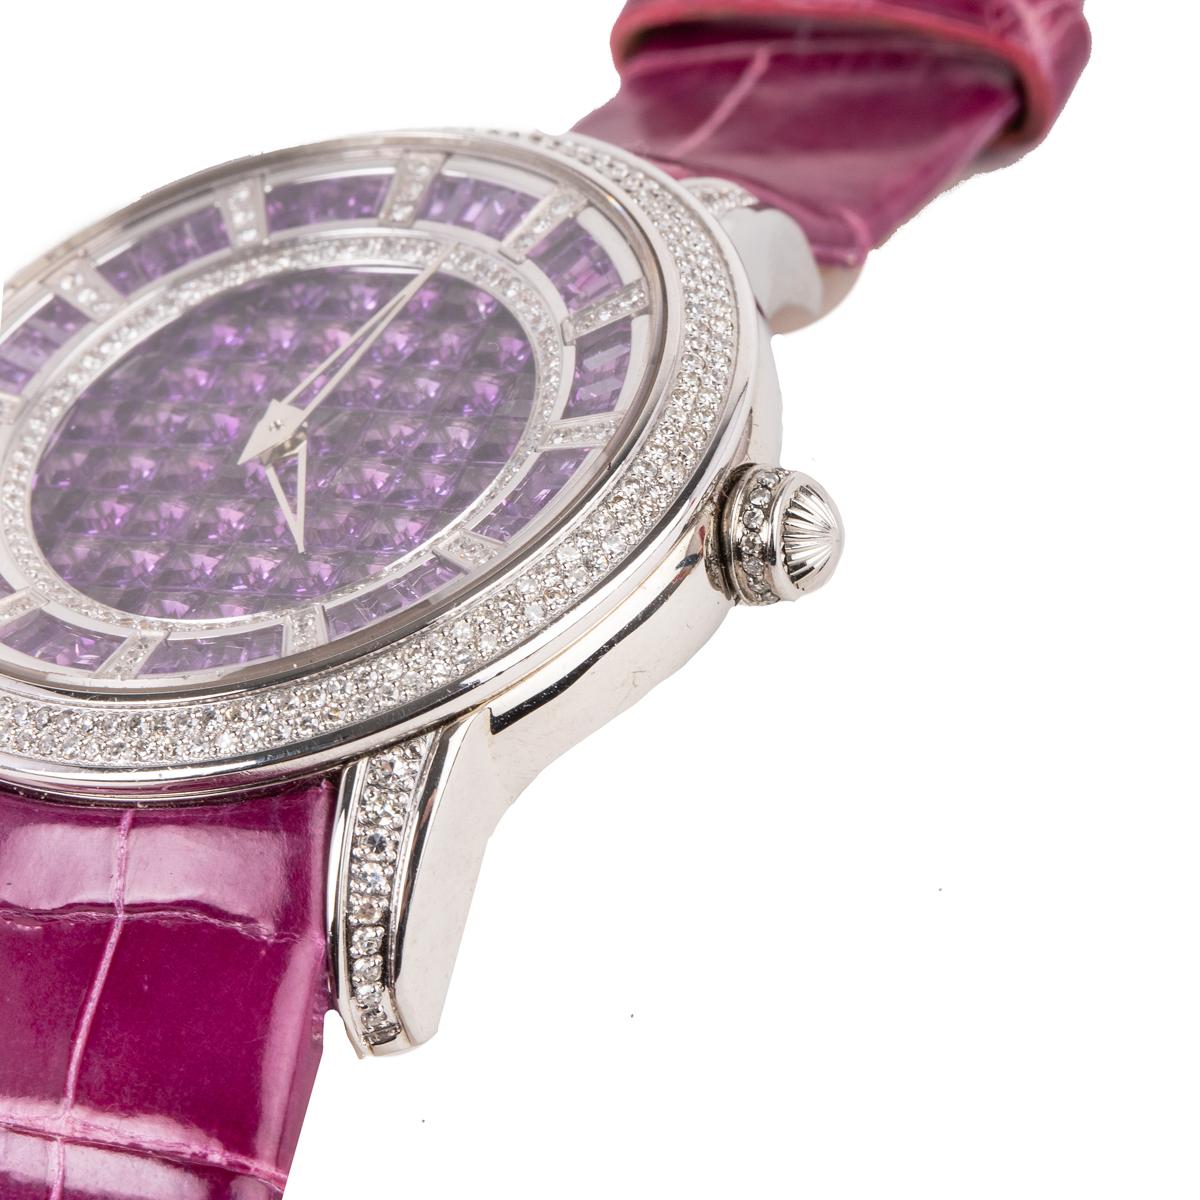 This watch features natural amethyst and diamonds that are precision cut on the entire face of the watch.  This watch features automatic movement and is made with stainless steel and fine leather.